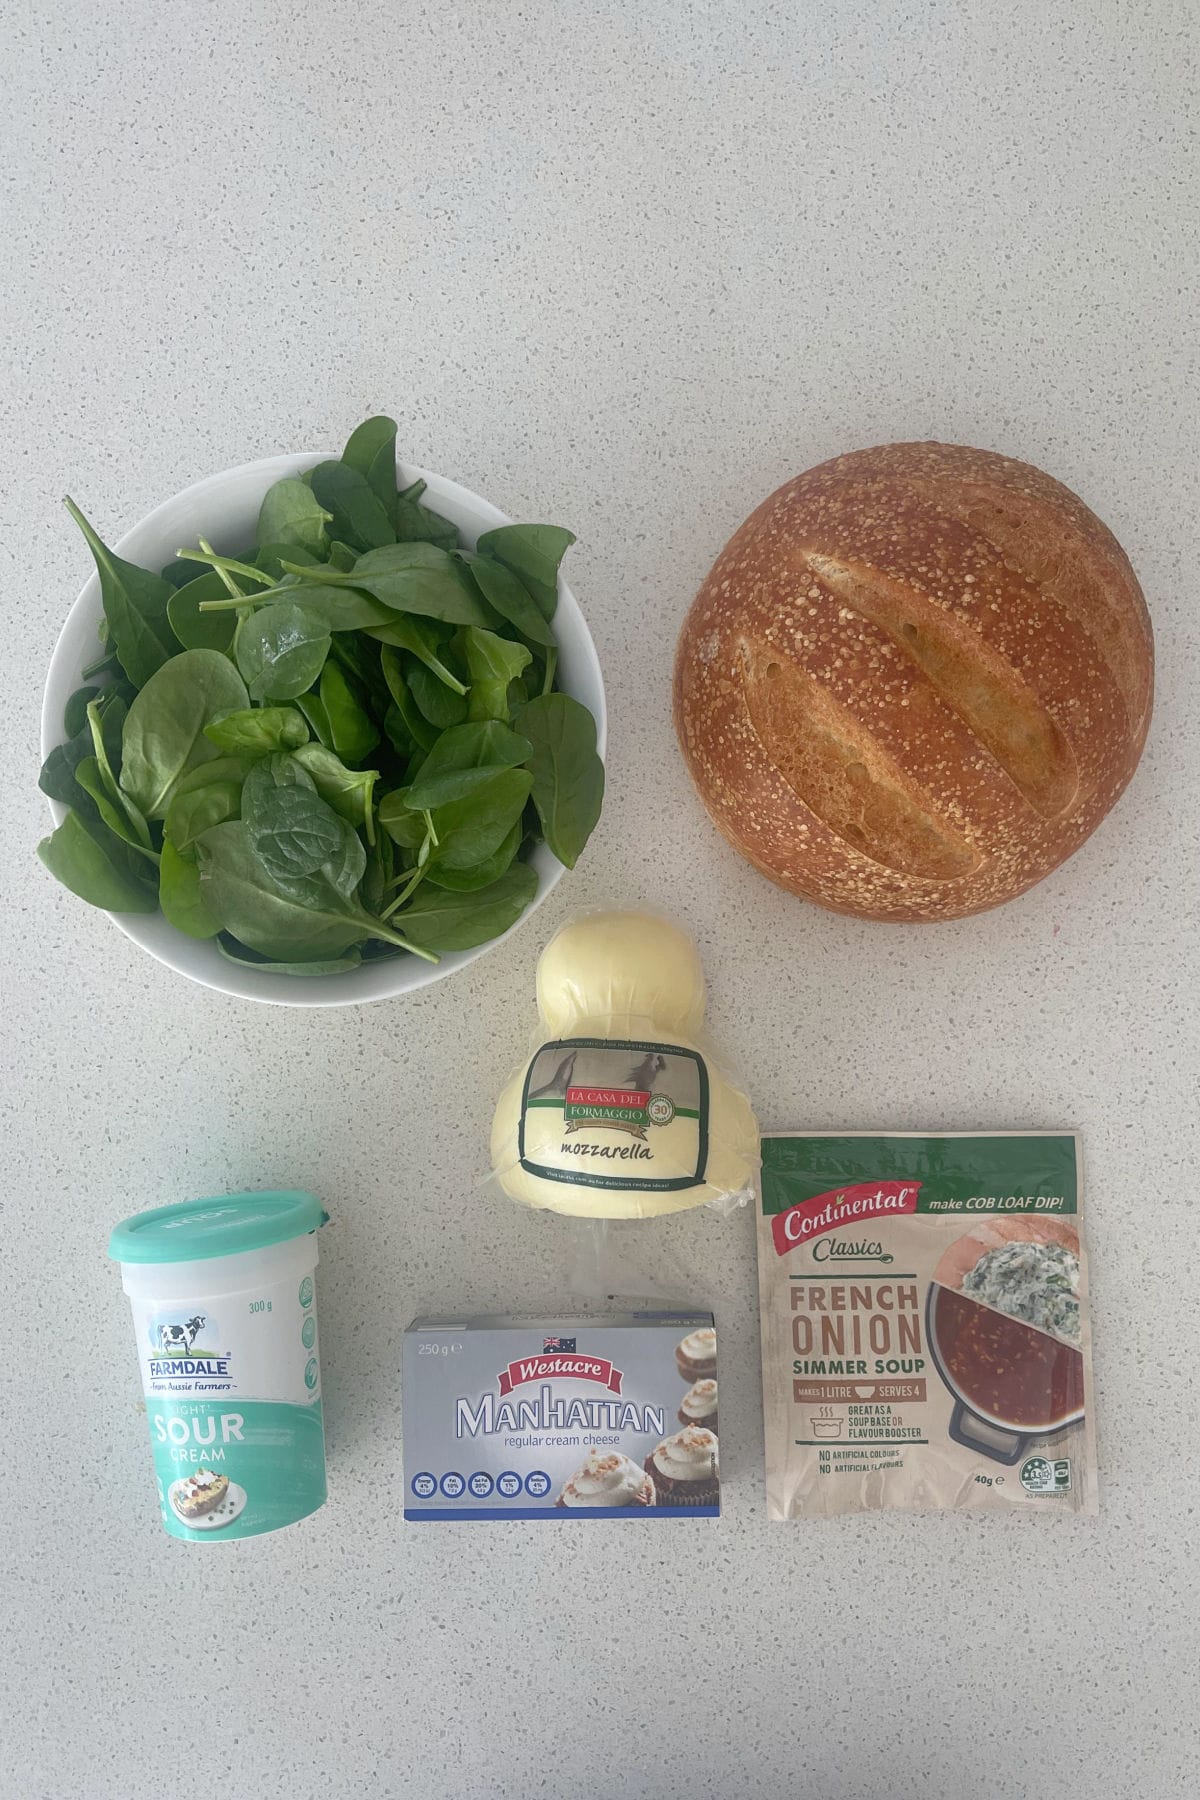 Ingredients to make spinach cob loaf dip on a bench.